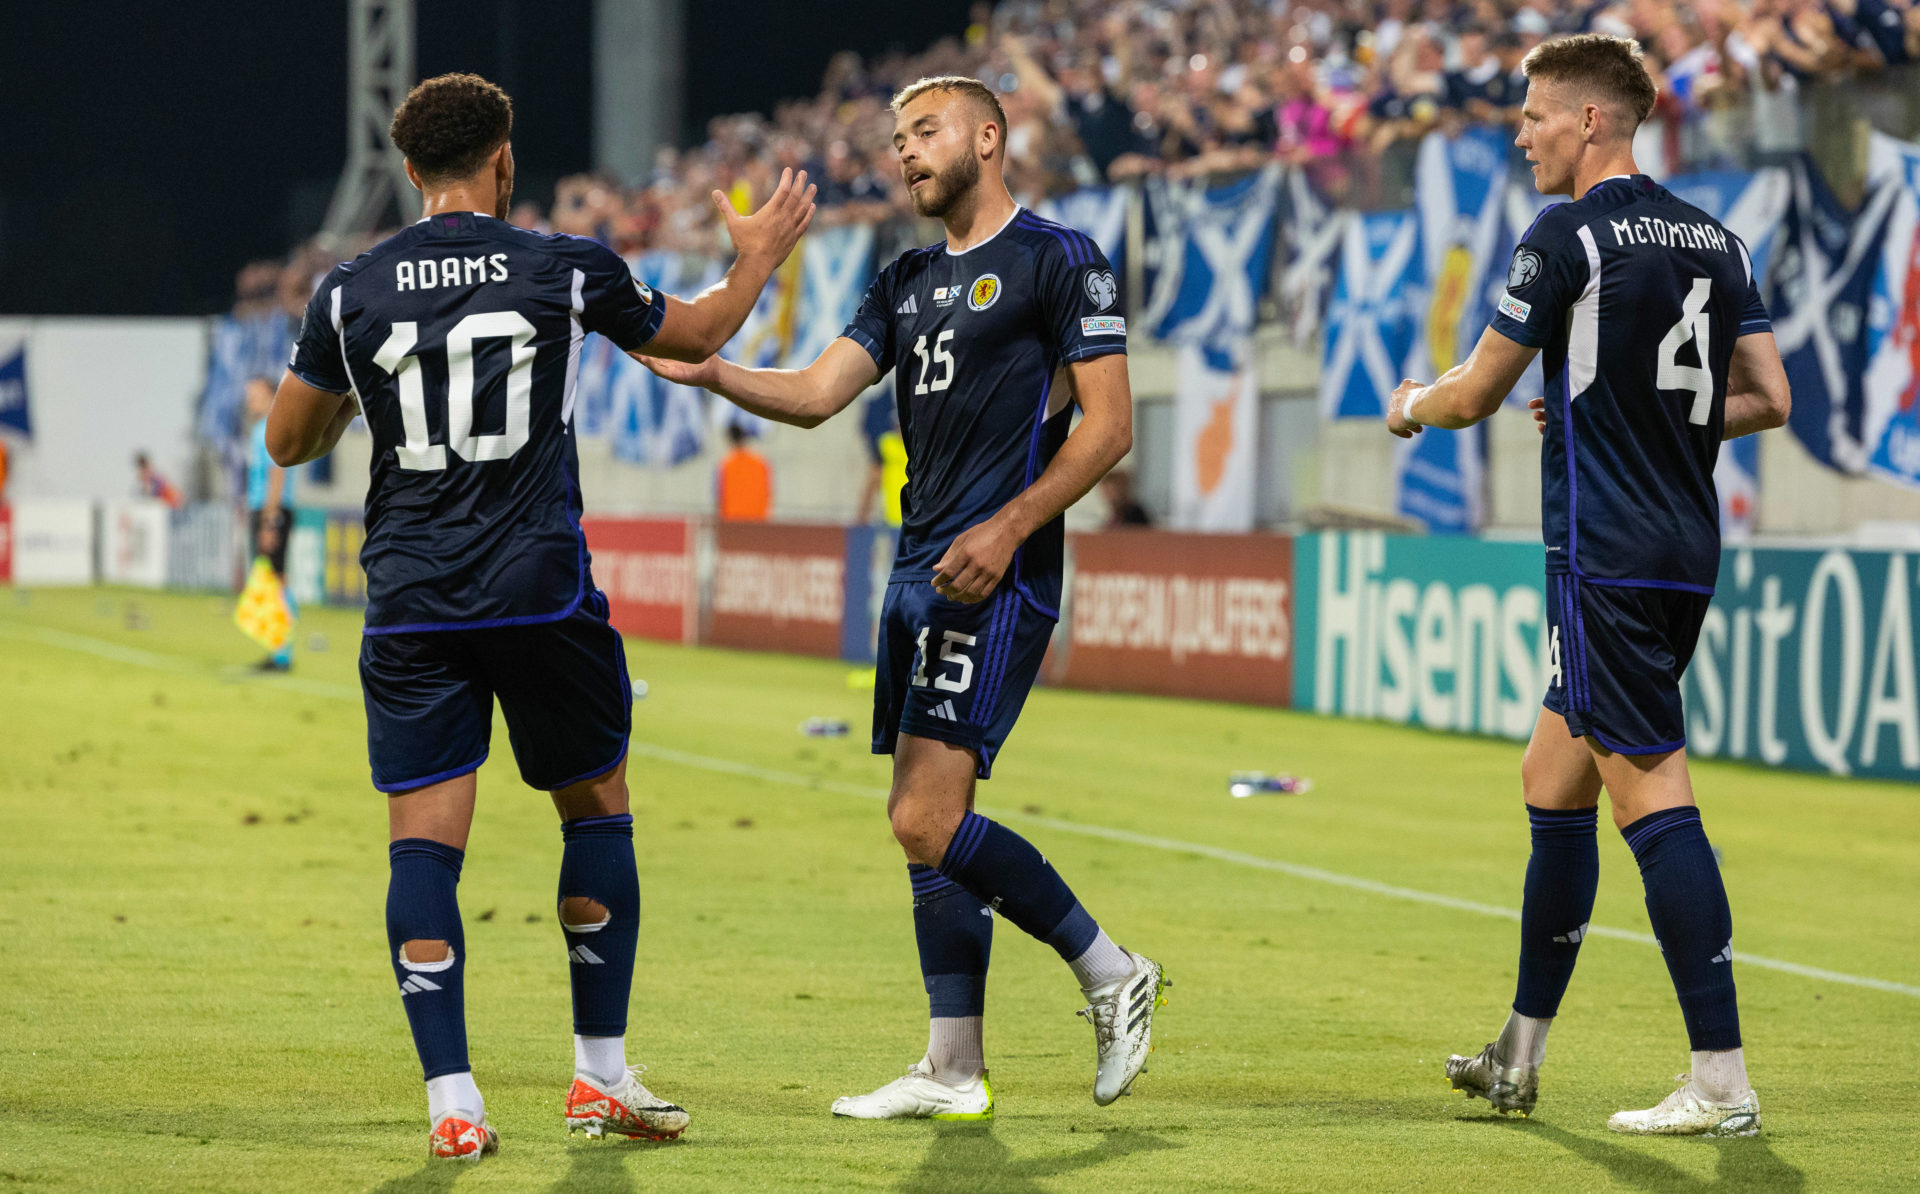 HALF TIME REPORT: Scotland cruising in Cyprus with 3-0 lead